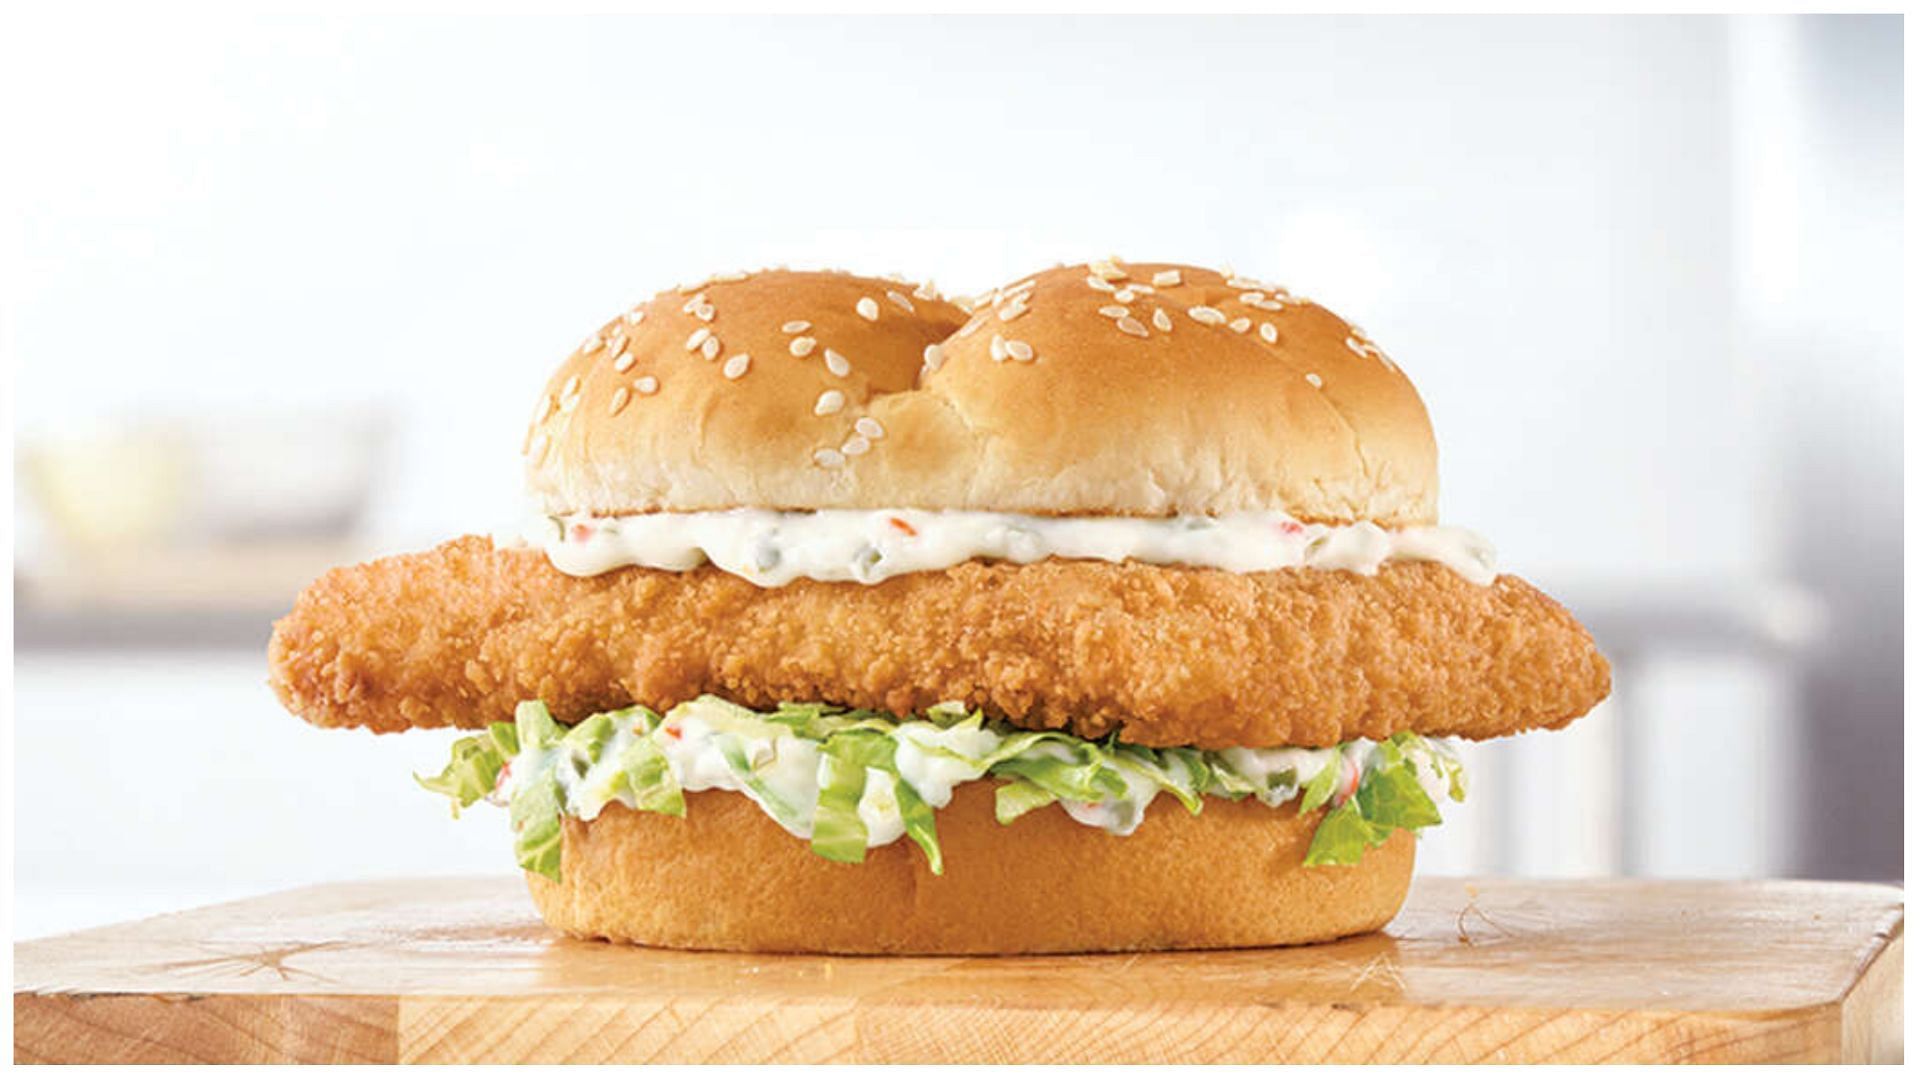 Arby's seasonal fish sandwiches return to its menu for a limited time